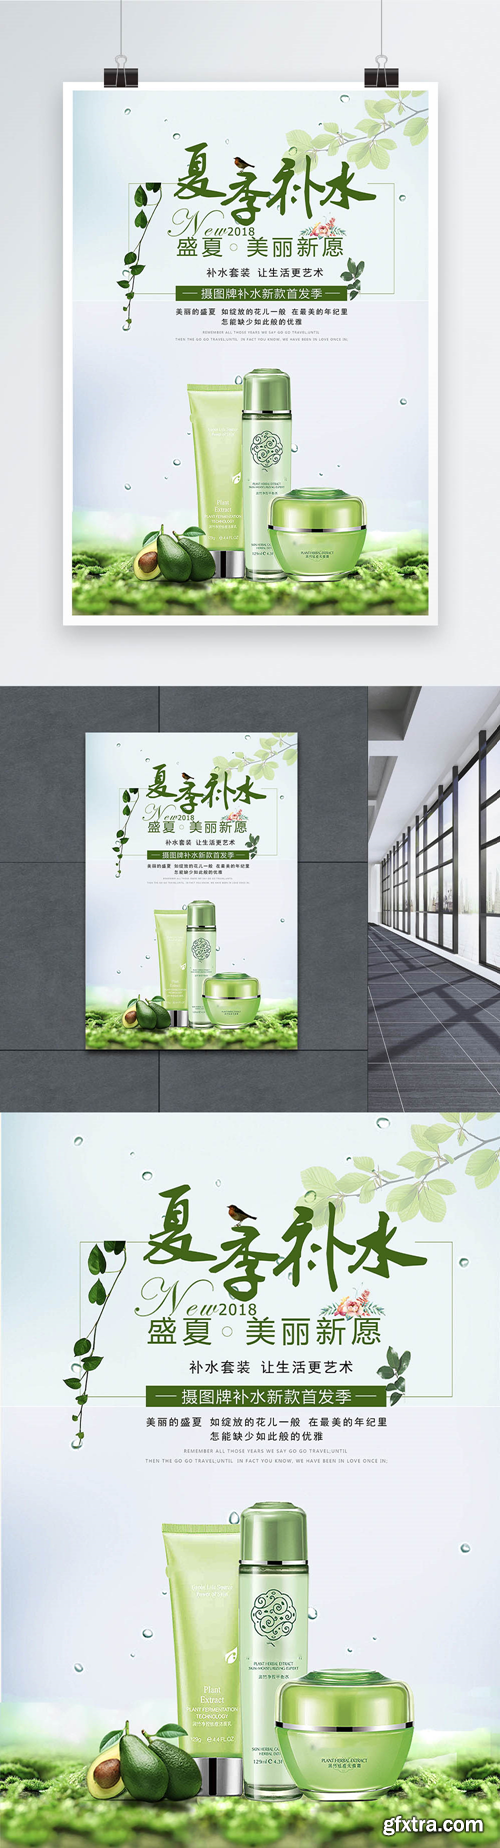 cosmetic posters for water replenishment in summer